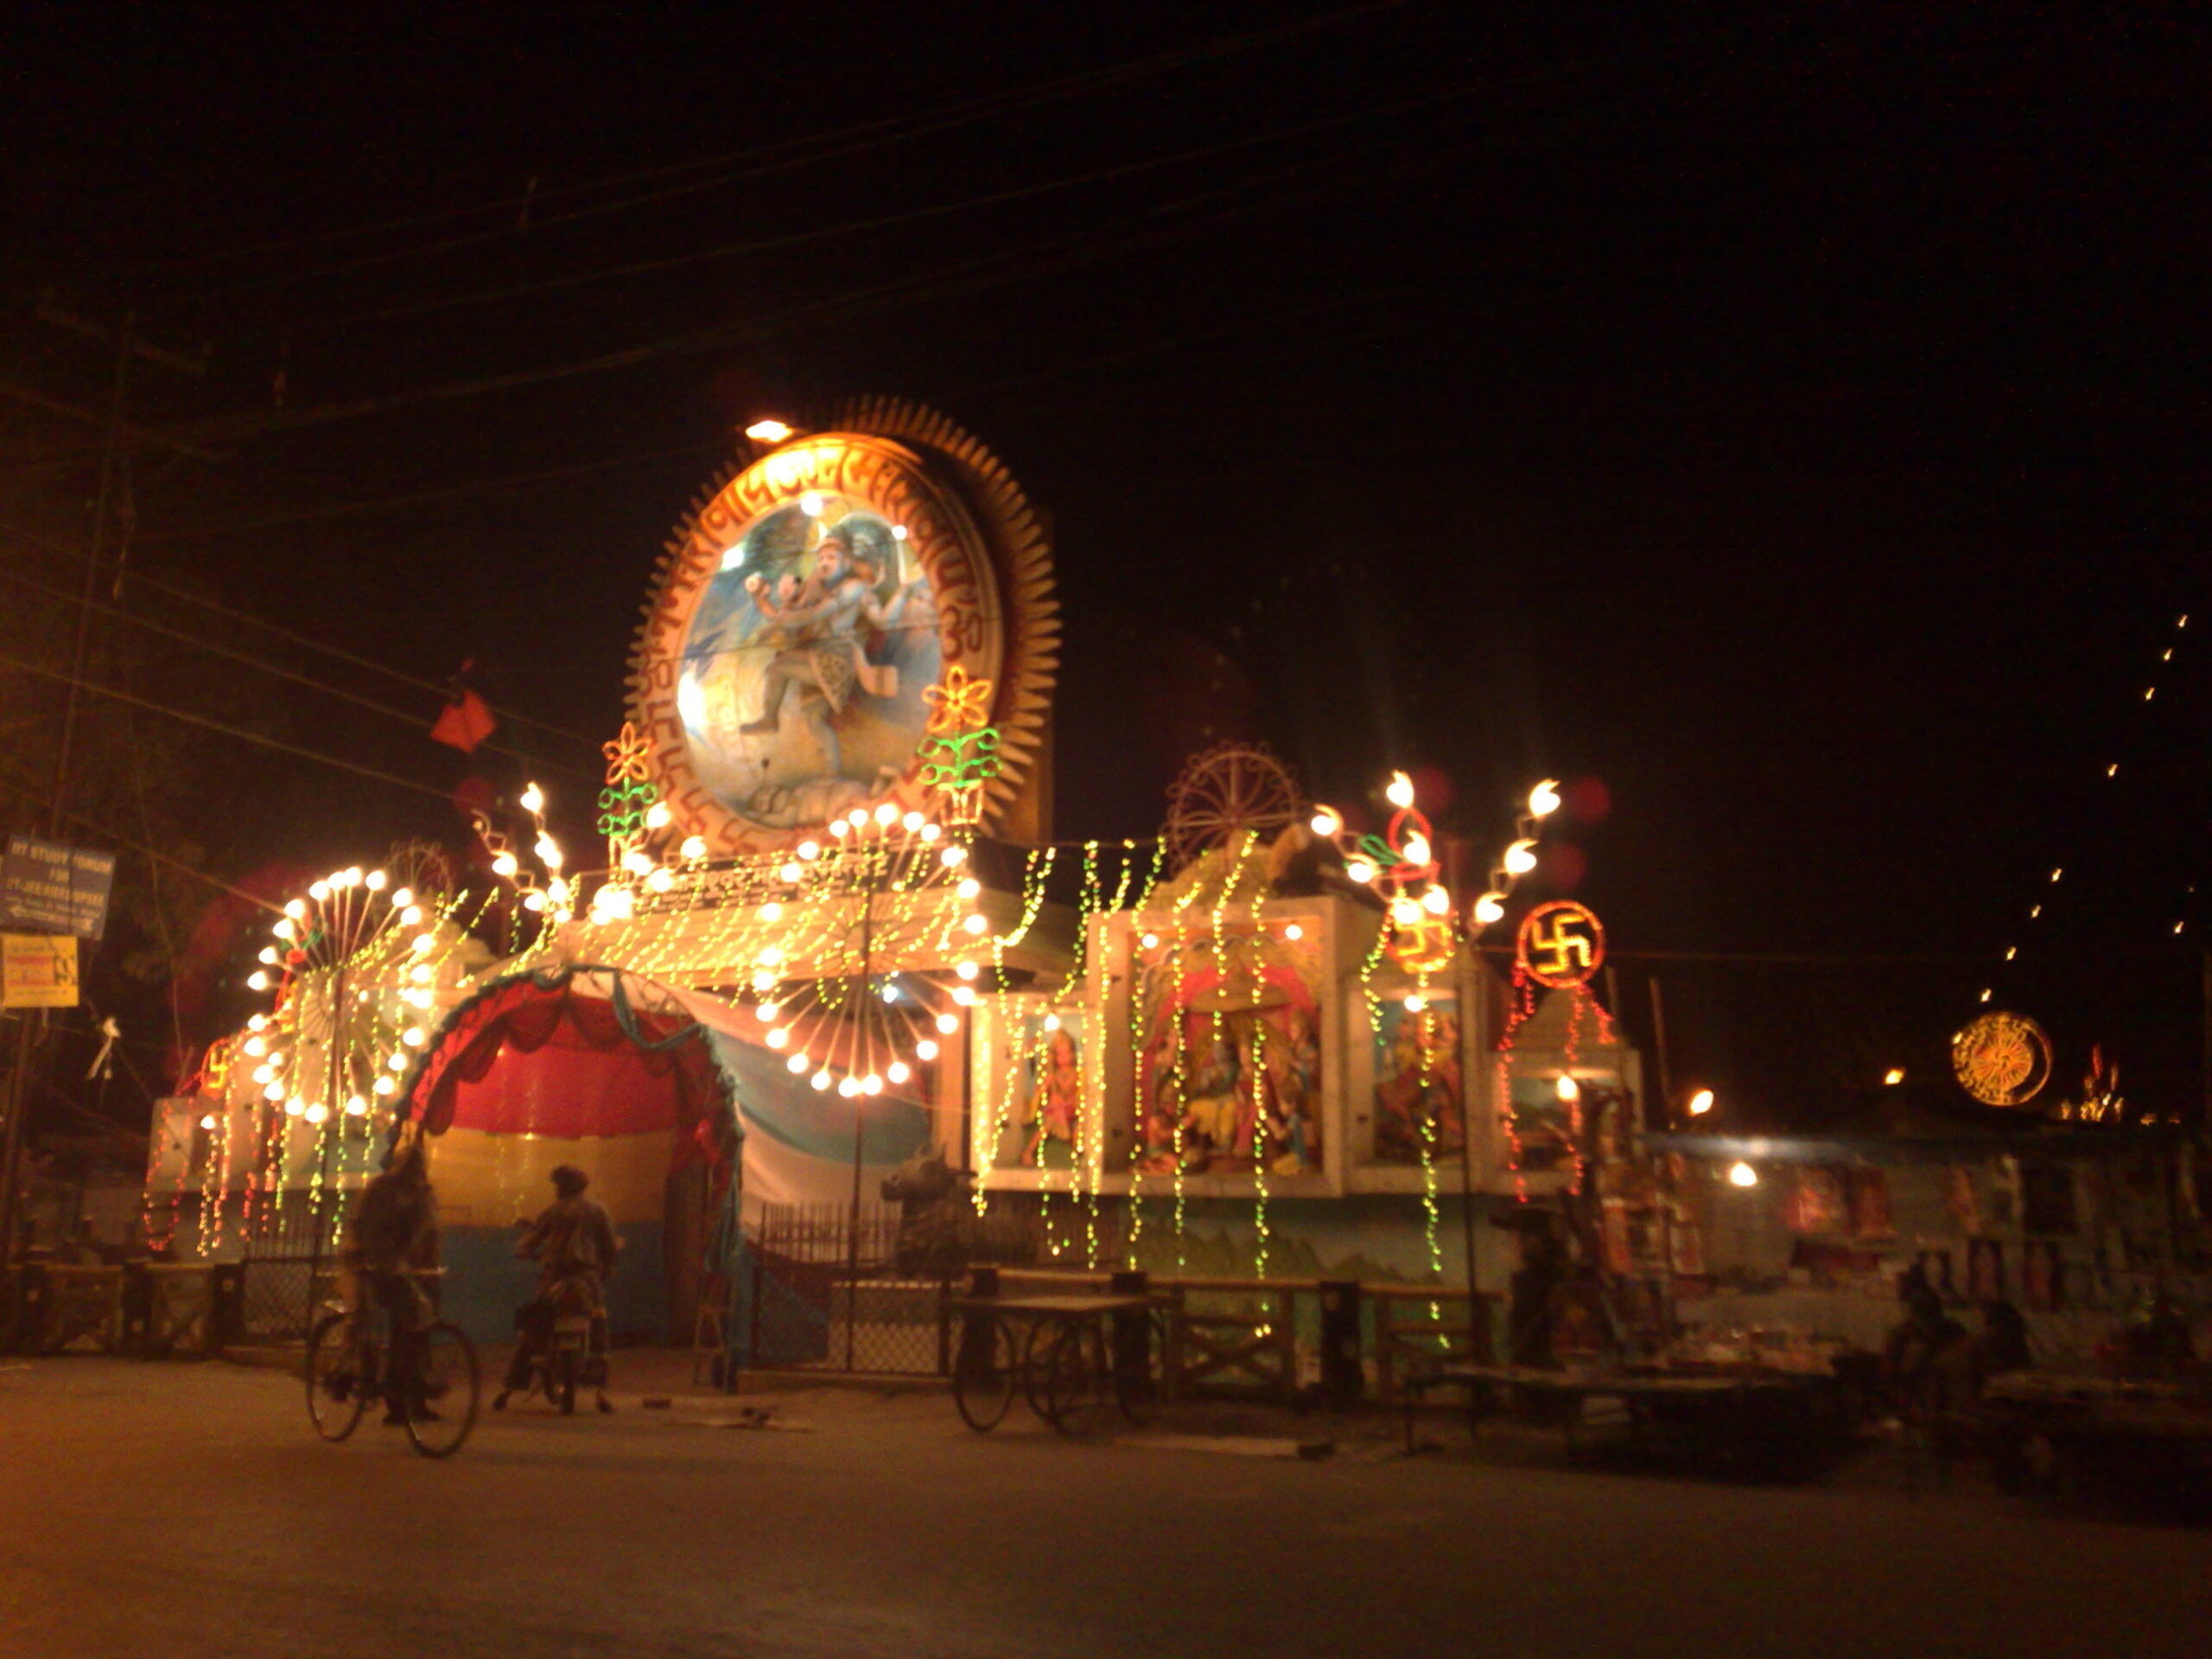 After Many Years Visited My Childhood City & Home : Saharanpur, India (Feb'09) 11